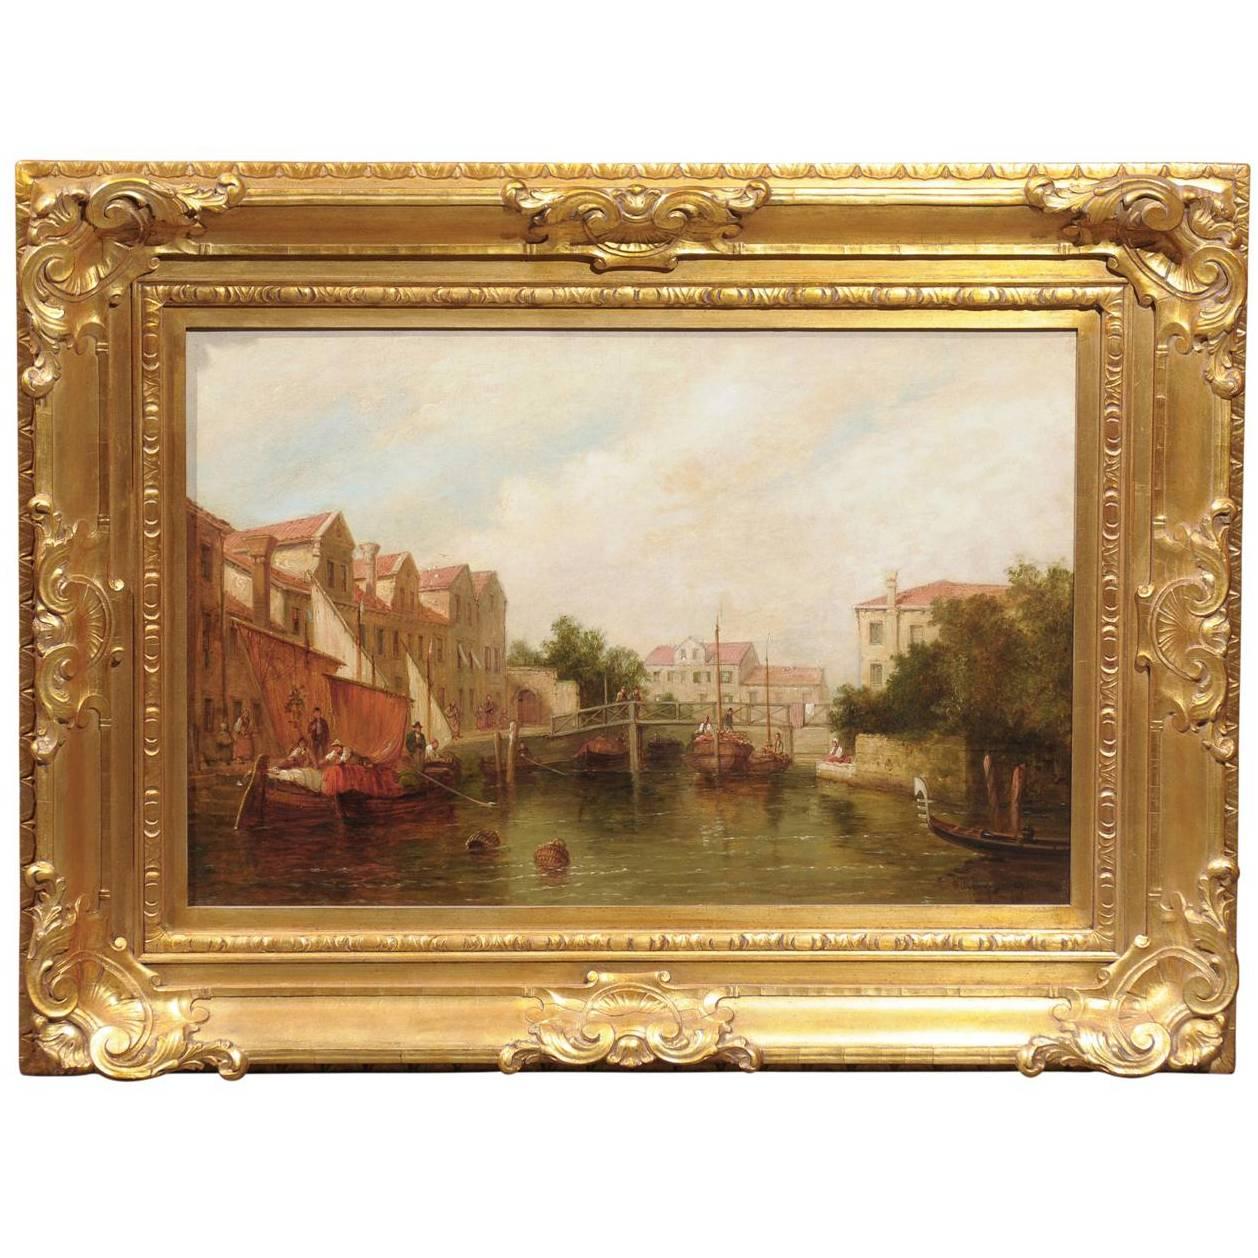 Oil Painting of a Canal Scene with Boats and Pedestrians from Late 19th Century